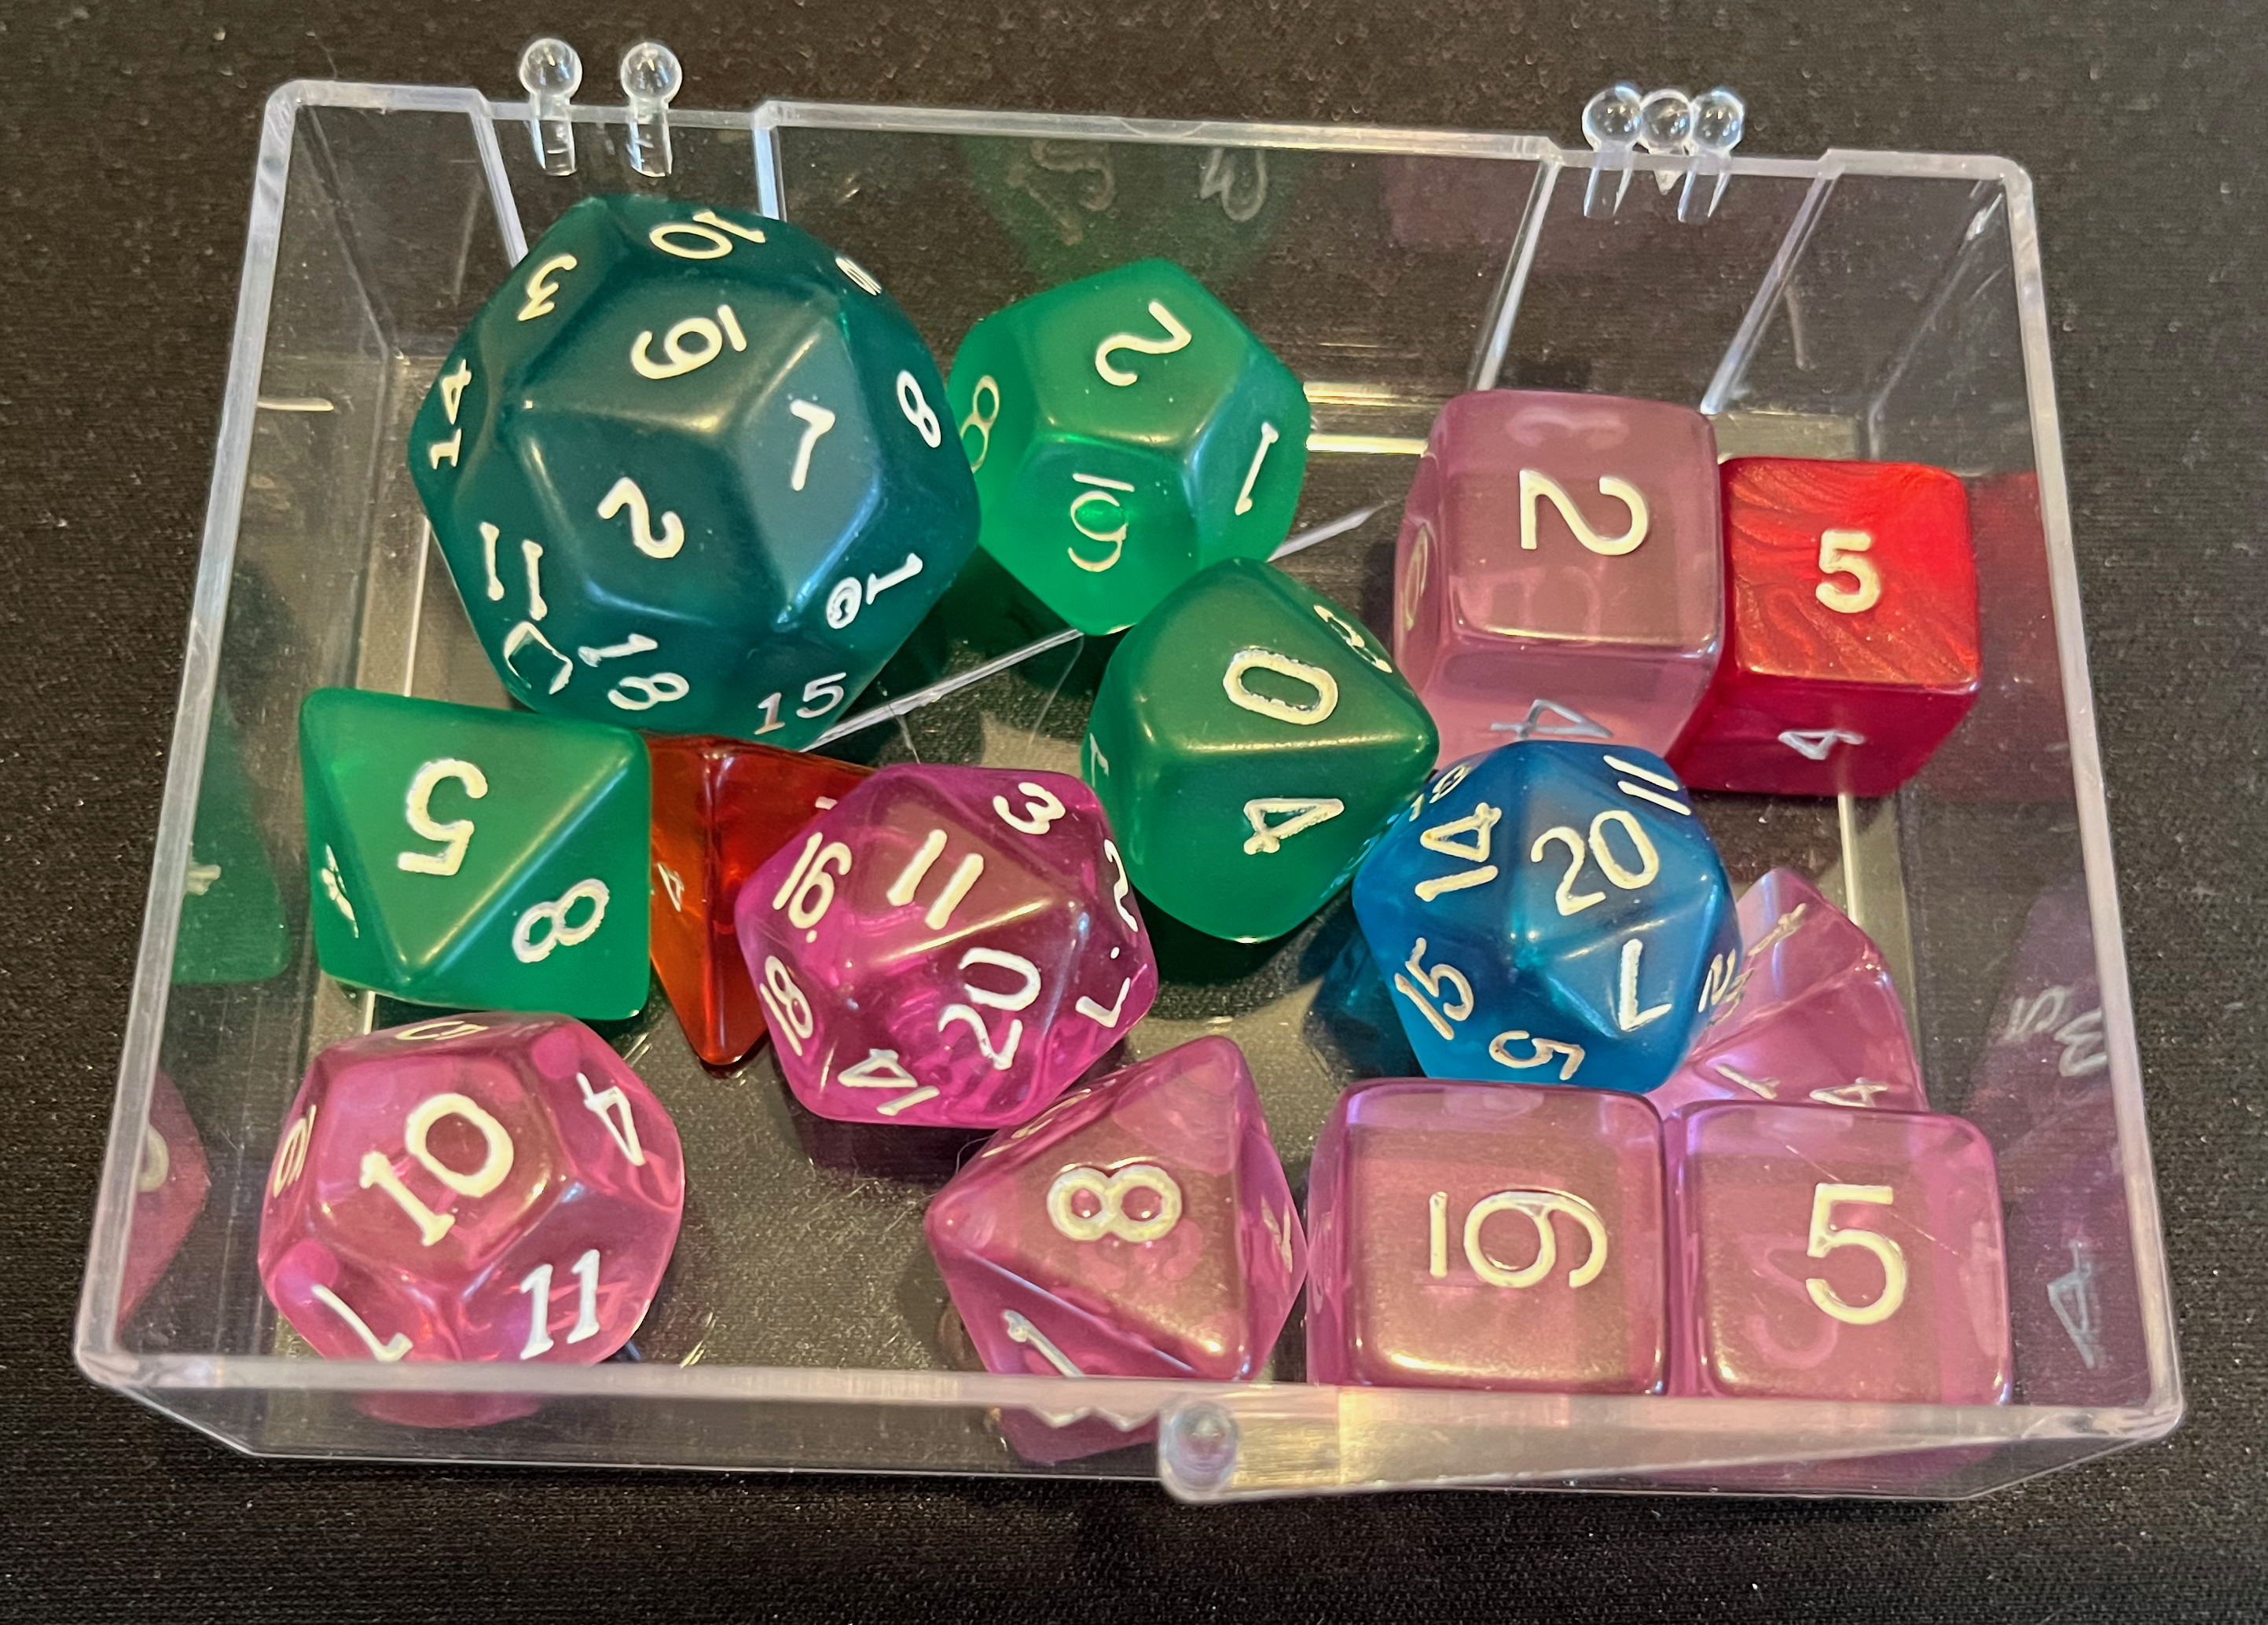 A motley collection of cheap translucent acrylic(?) dice in pink, with some greens, and the odd blue or red.